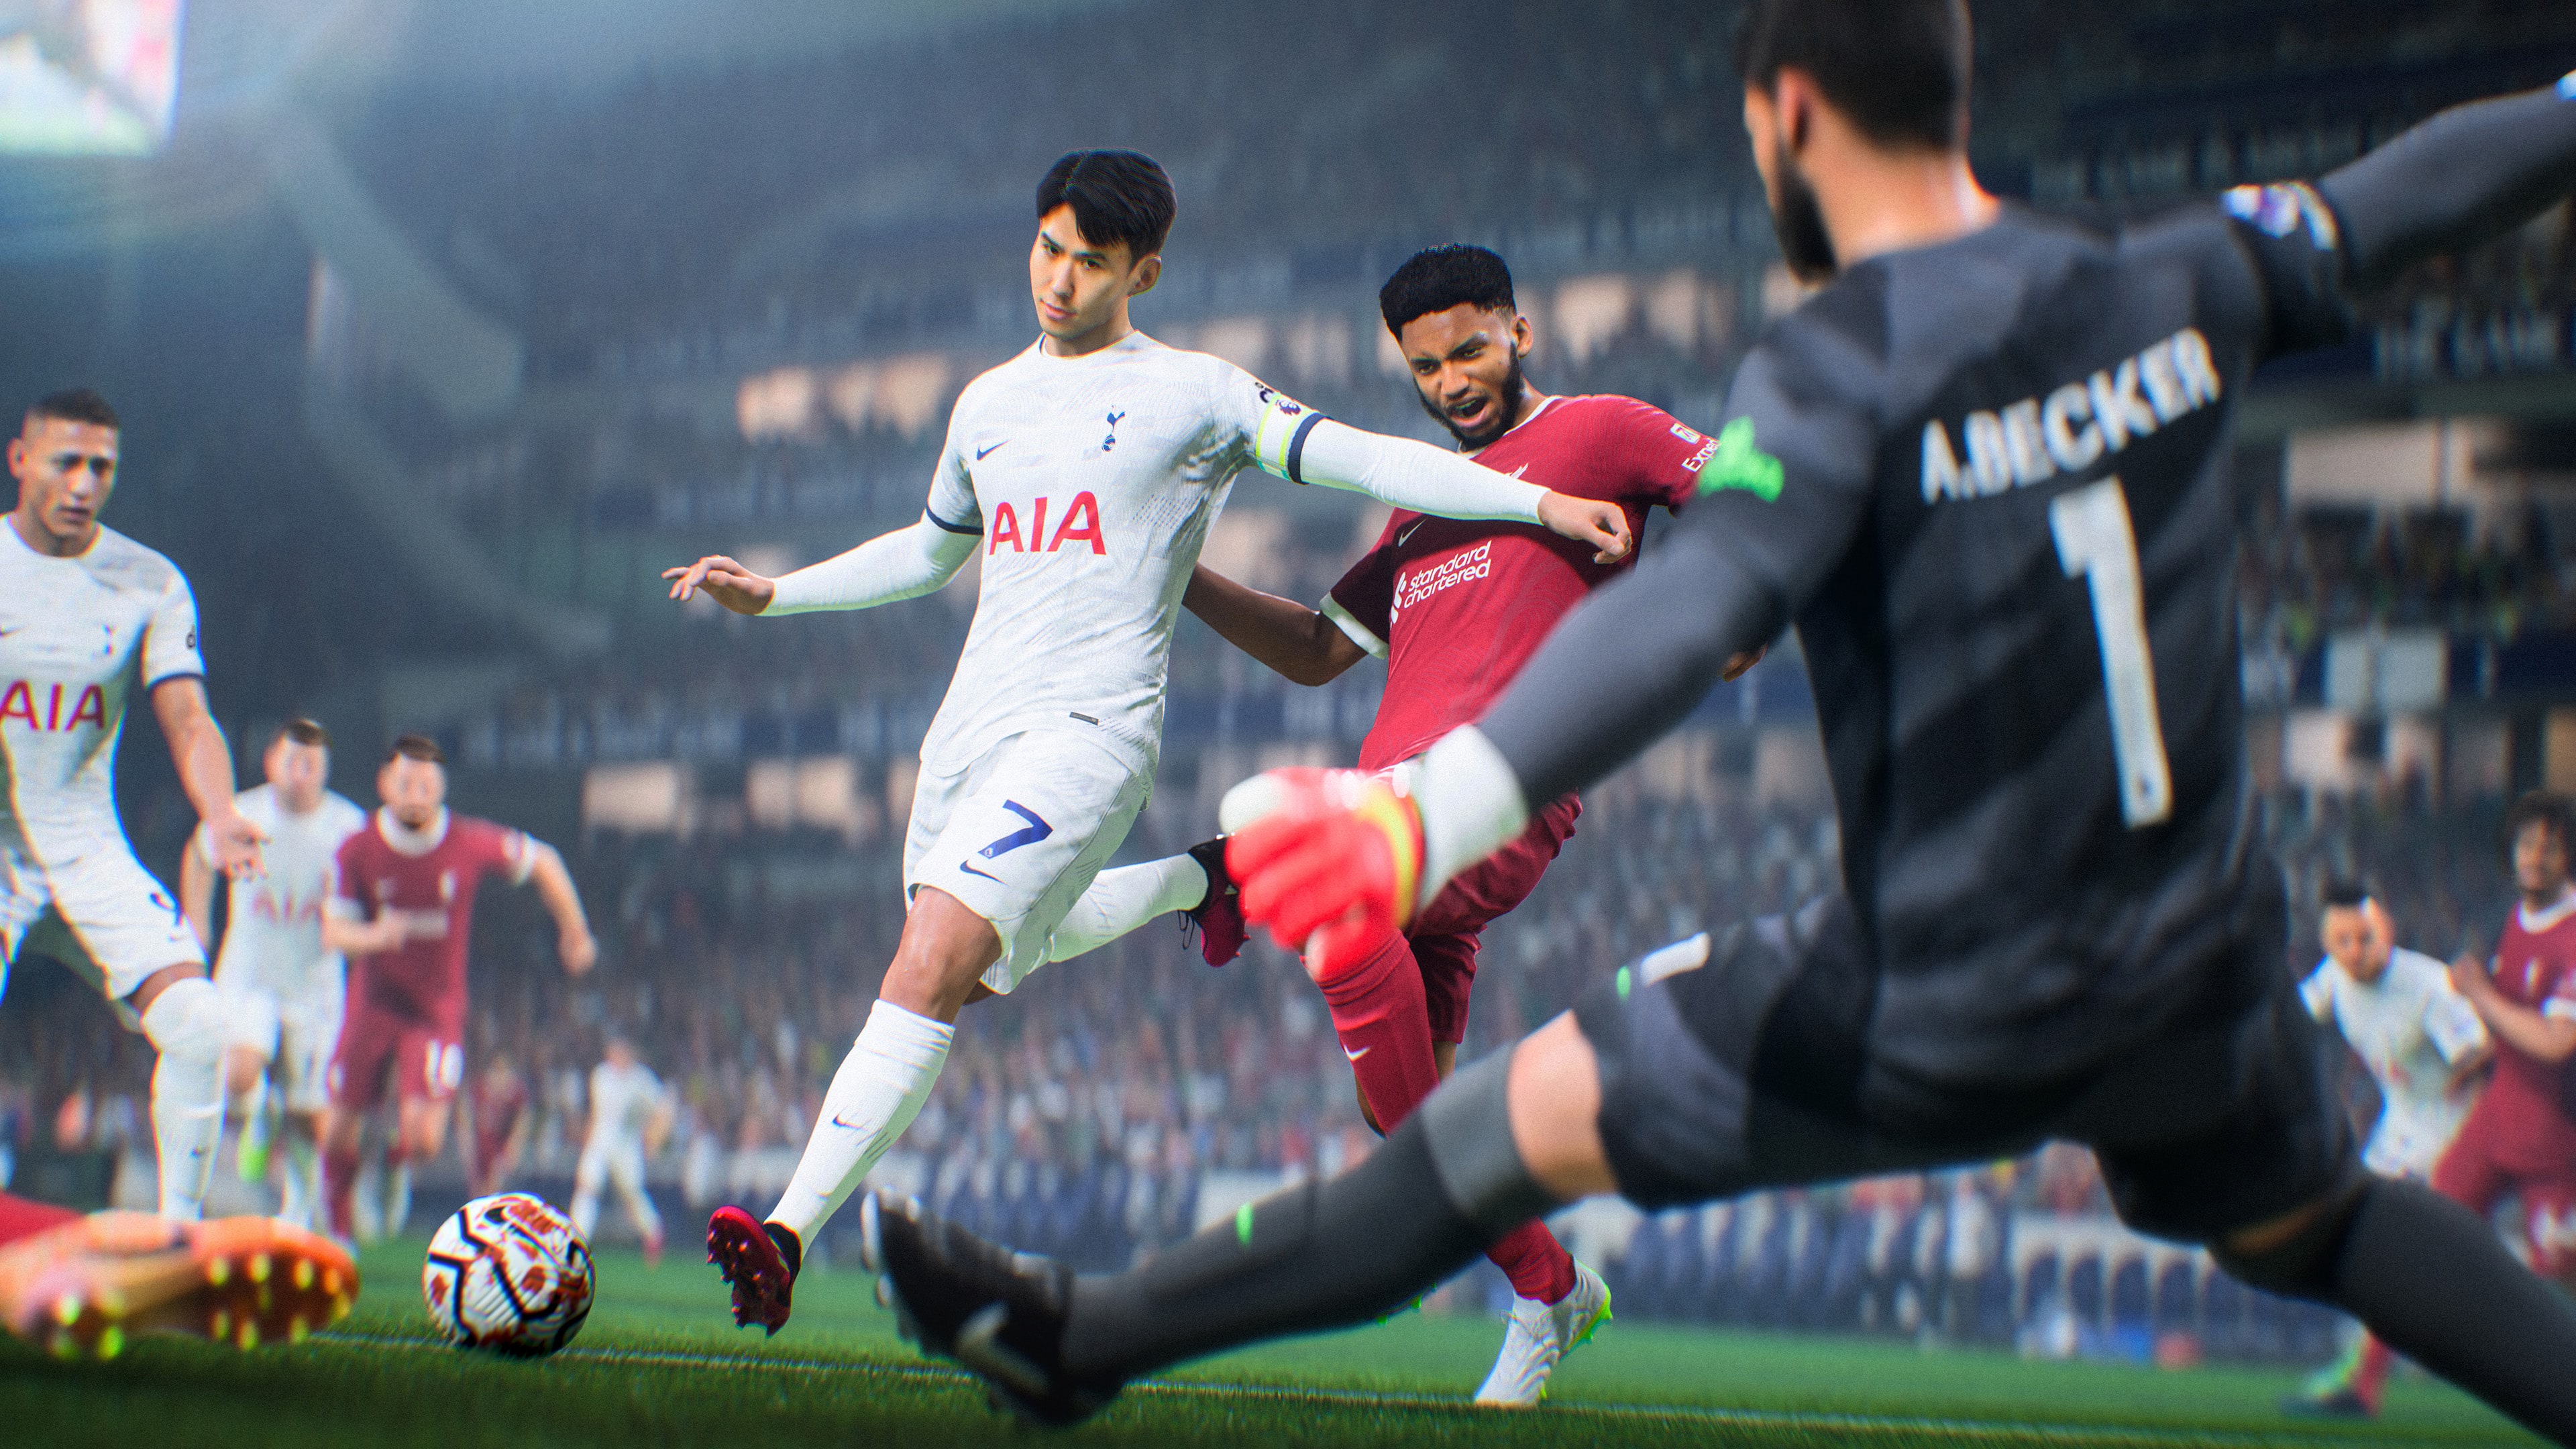 EA Sports FC 24 (PS5) cheap - Price of $21.09